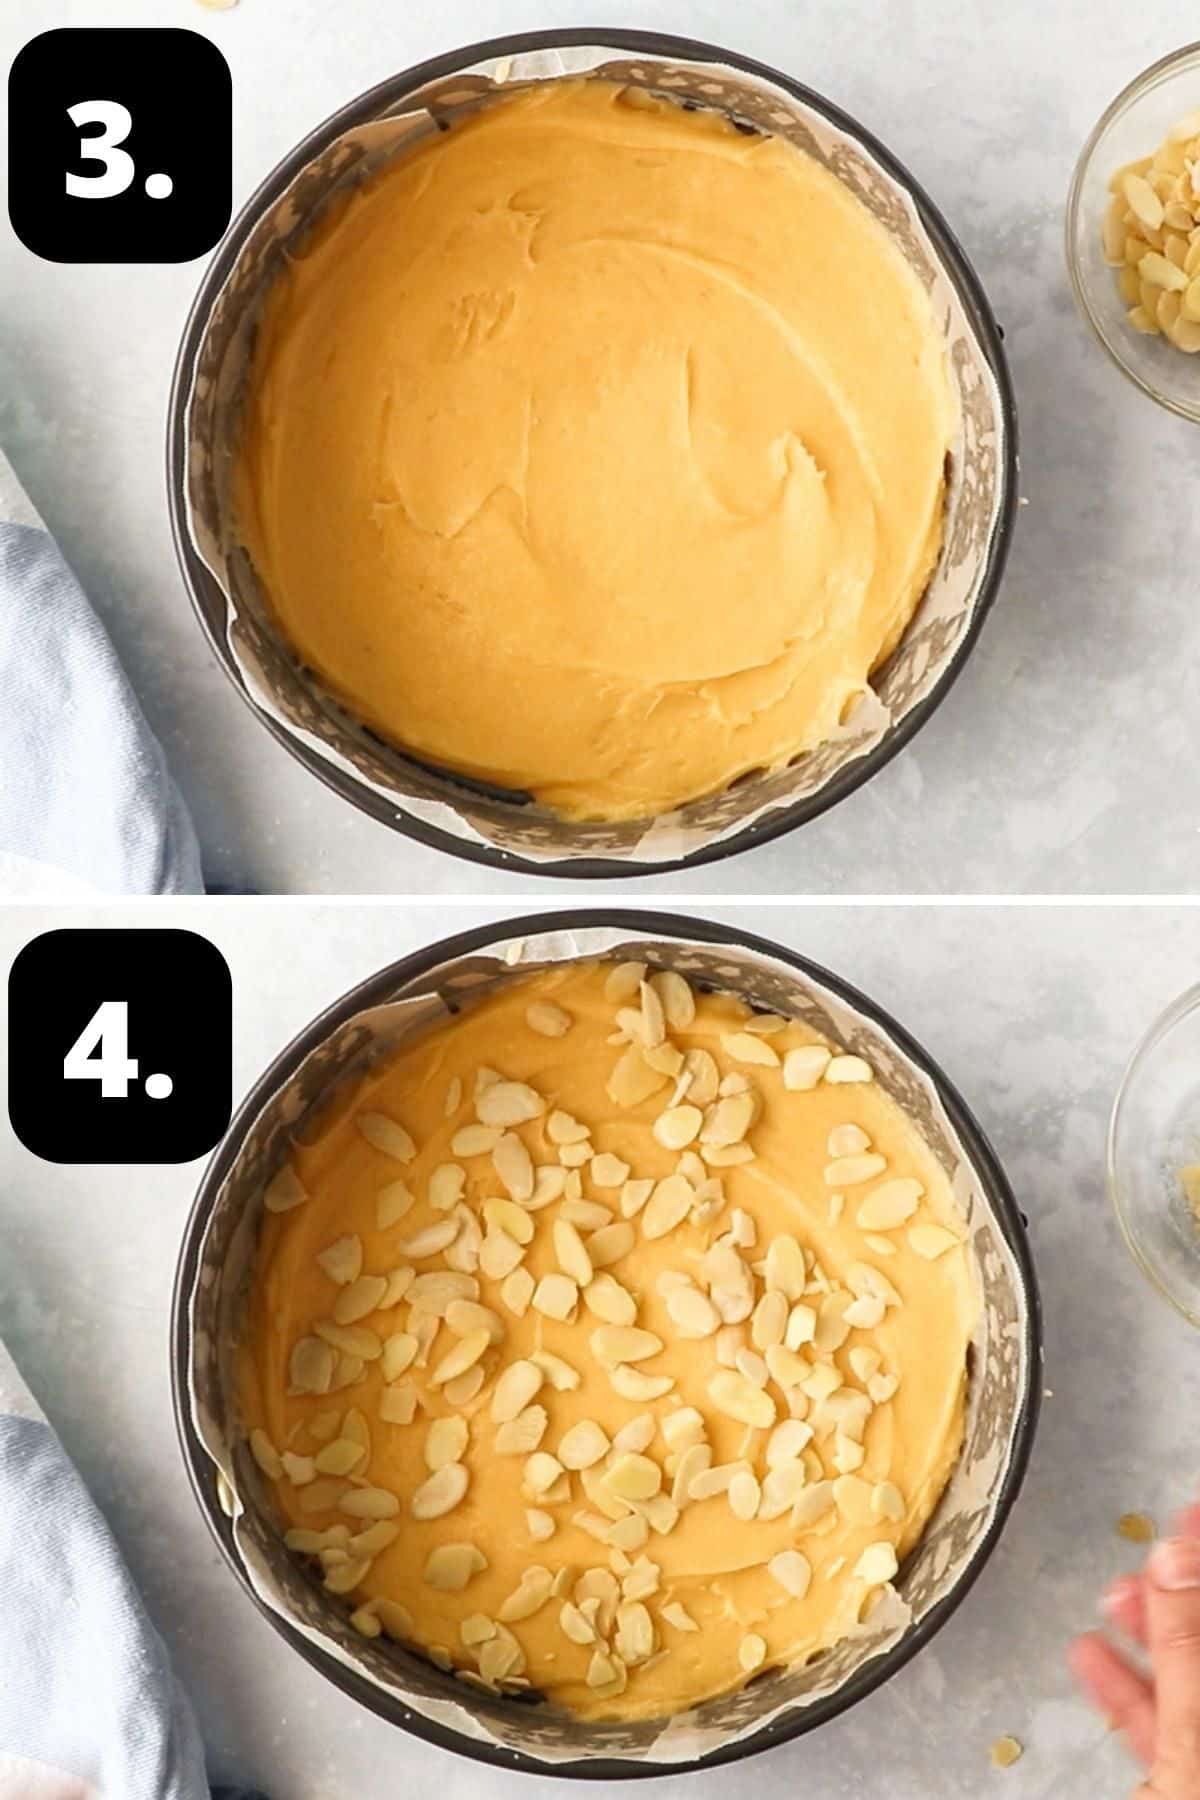 Steps 3-4 of preparing the recipe - the cake batter in the baking tin and topped with flaked almonds, ready for the oven.